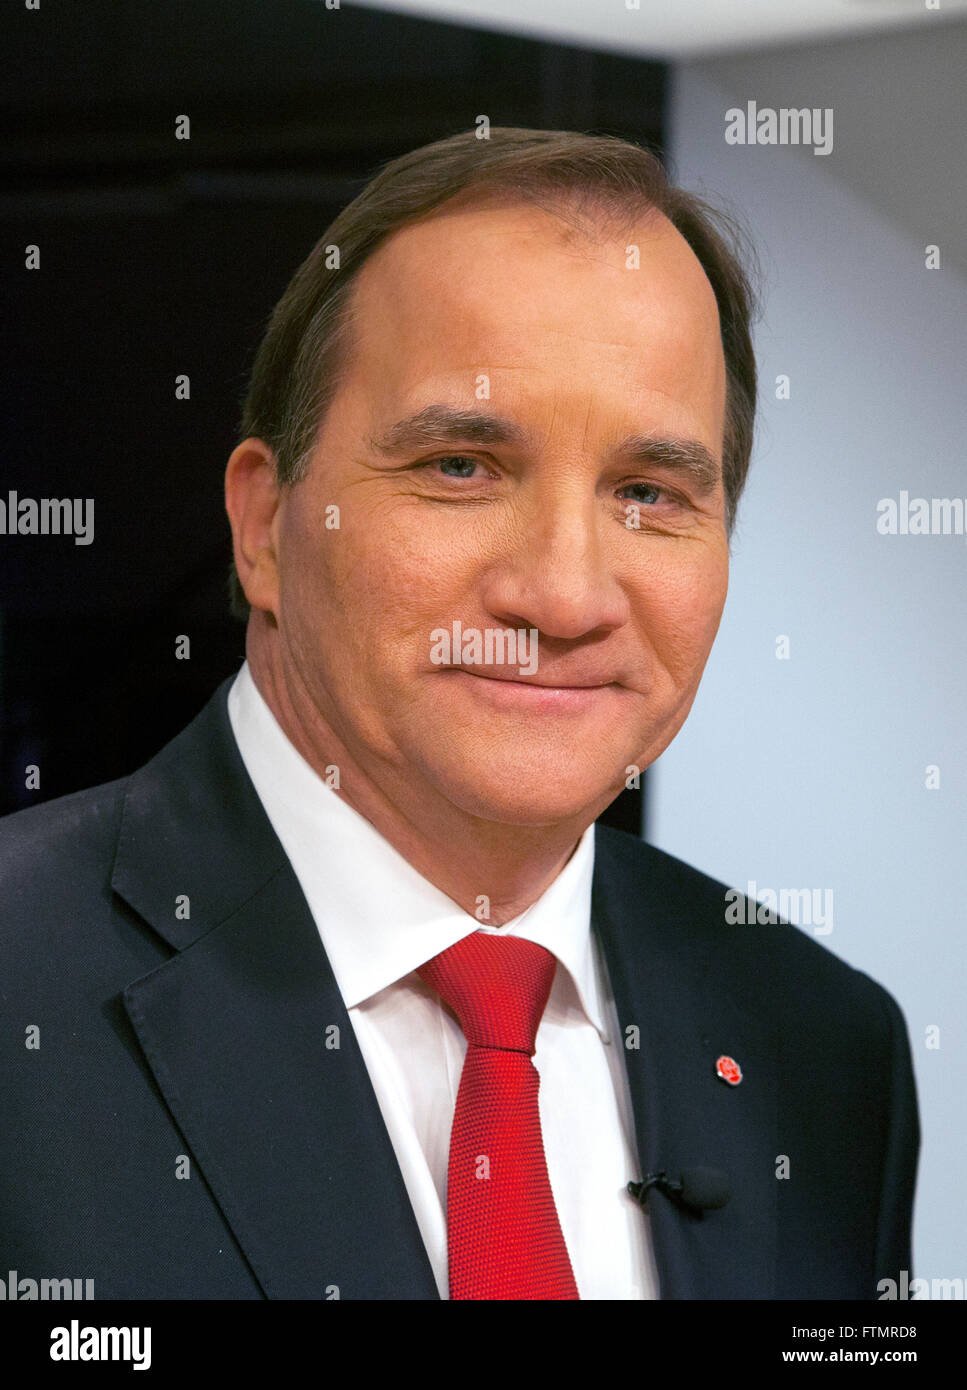 STEFAN LÖFVÉN leader of the Social Democrats and the Swedish Prime minister Stock Photo